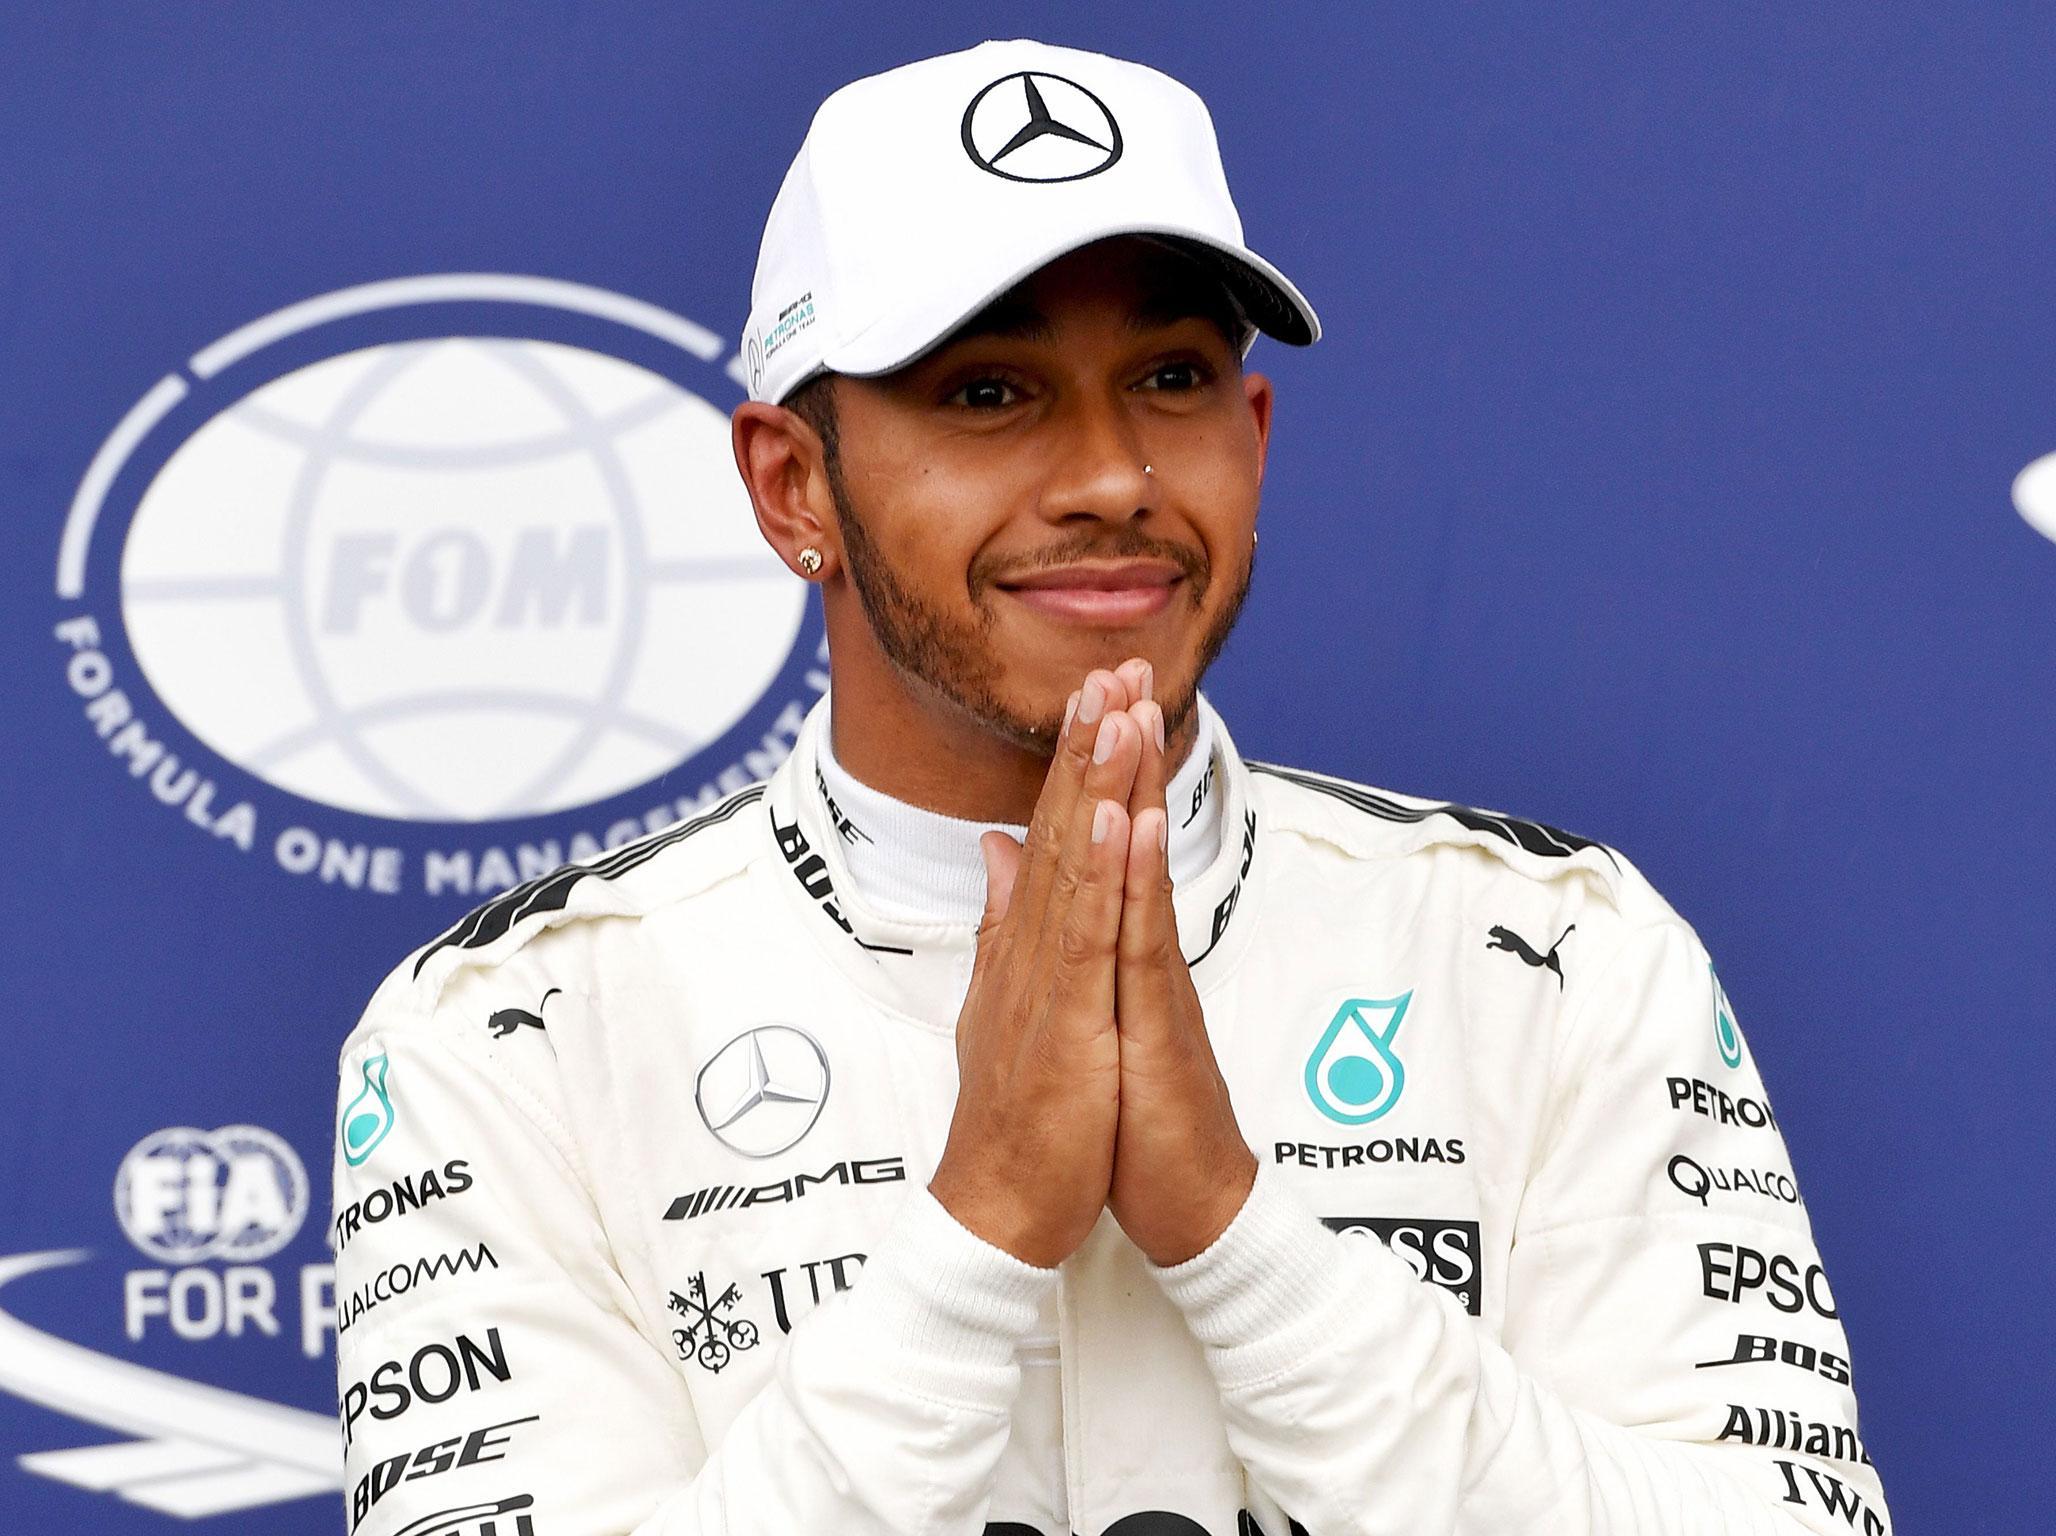 Lewis Hamilton put on a masterclass of wet-weather driving to top the timesheets at Monza